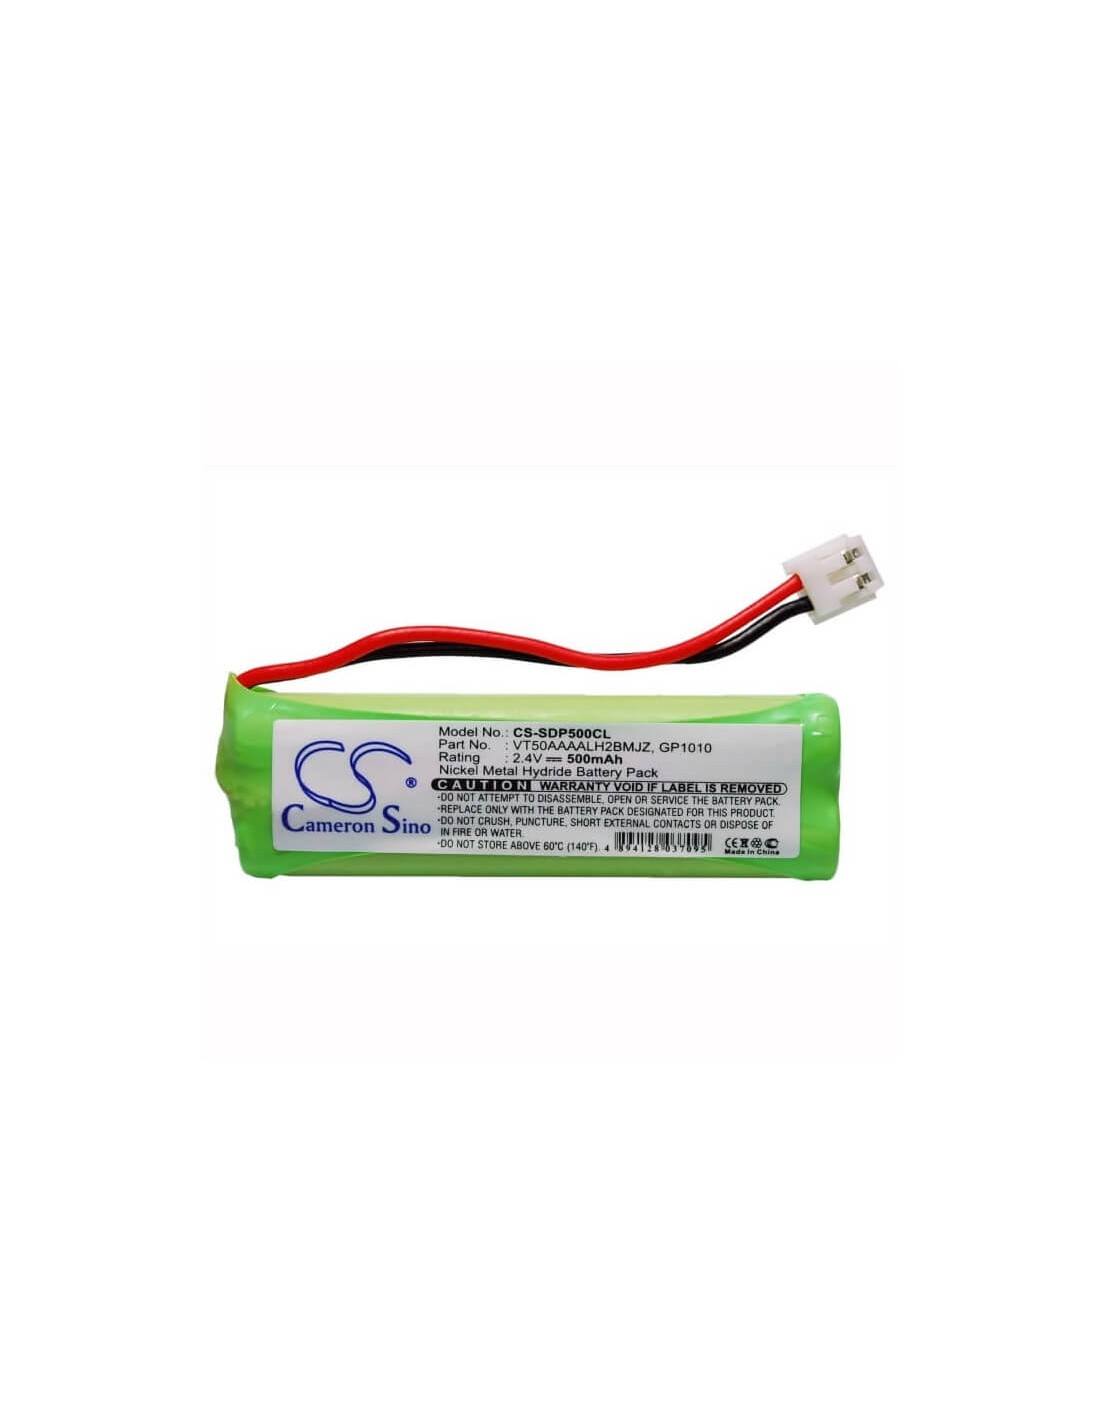 Battery for Audioline, Monza 480, Swissvoice, Dp500, 2.4V, 500mAh - 1.20Wh